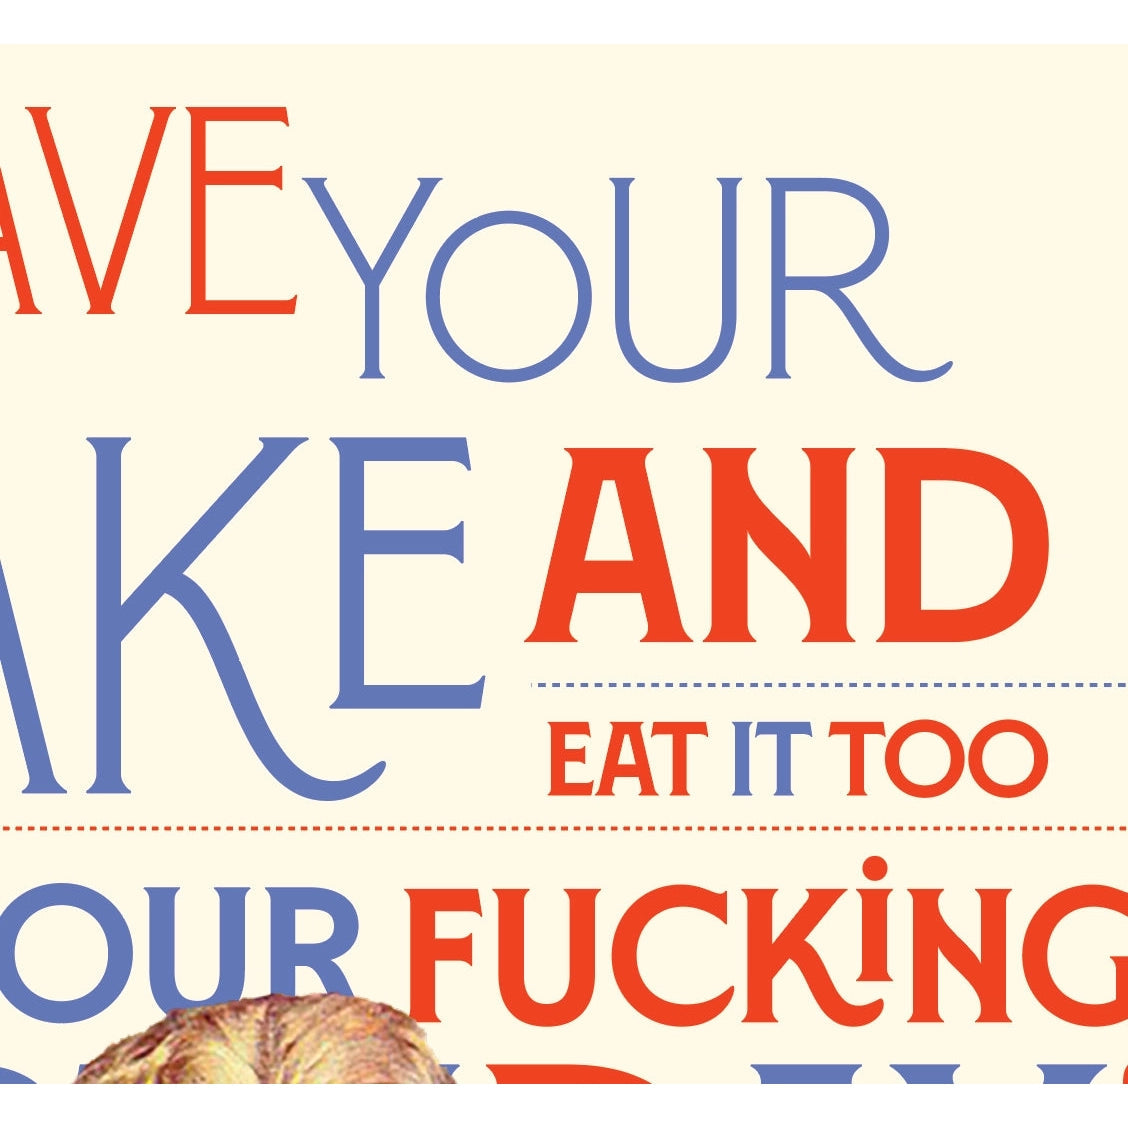 Have Your Cake And Eat It Too Greeting Card